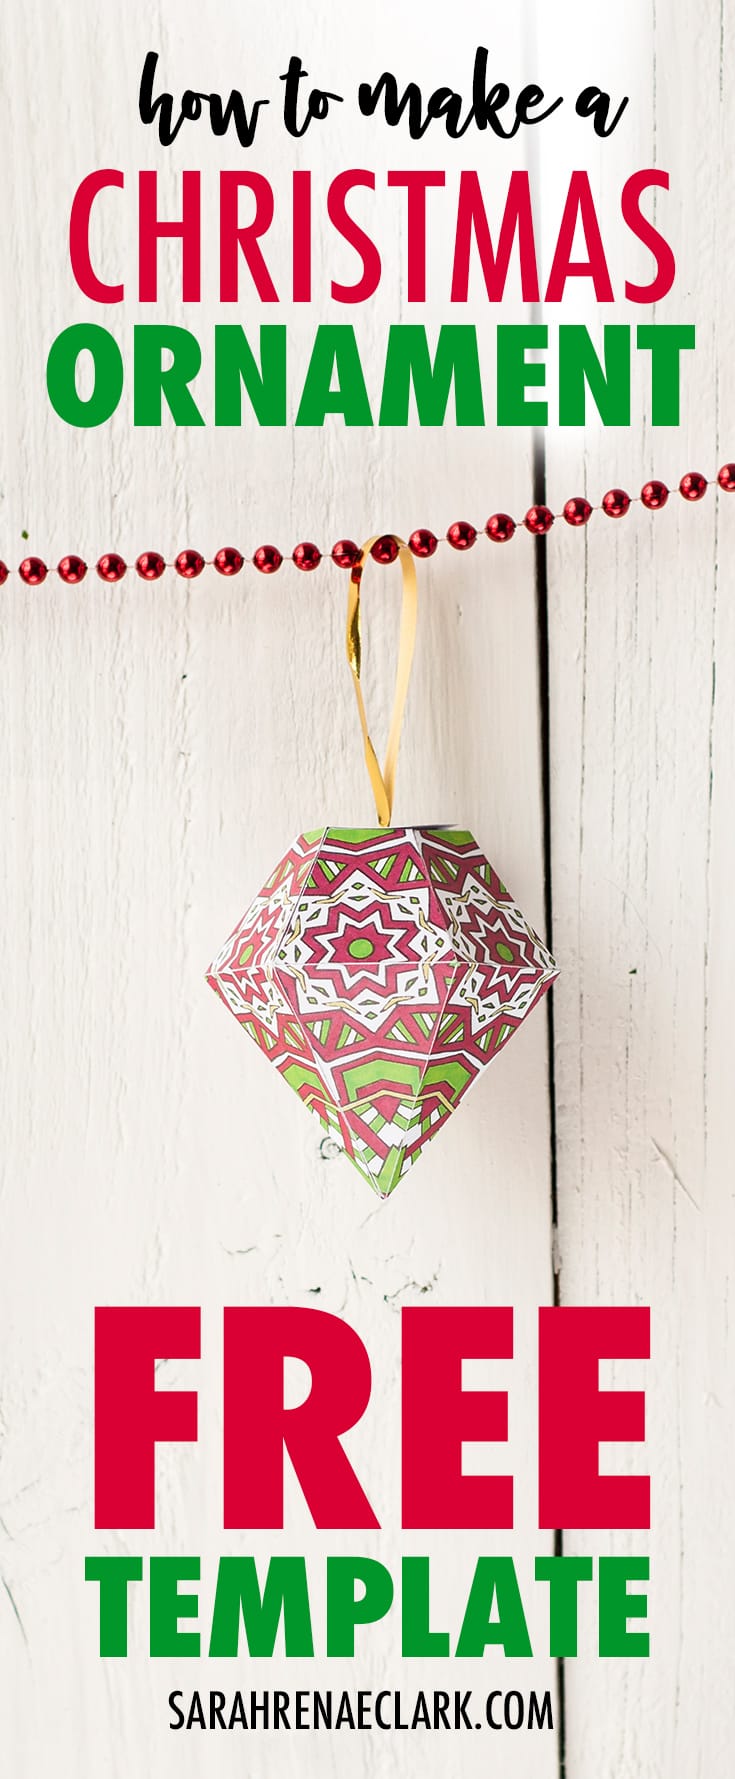 Make a paper ornament for your Christmas tree with this free printable template and tutorial! | Check it out at sarahrenaeclark.com #christmas #freeprintable